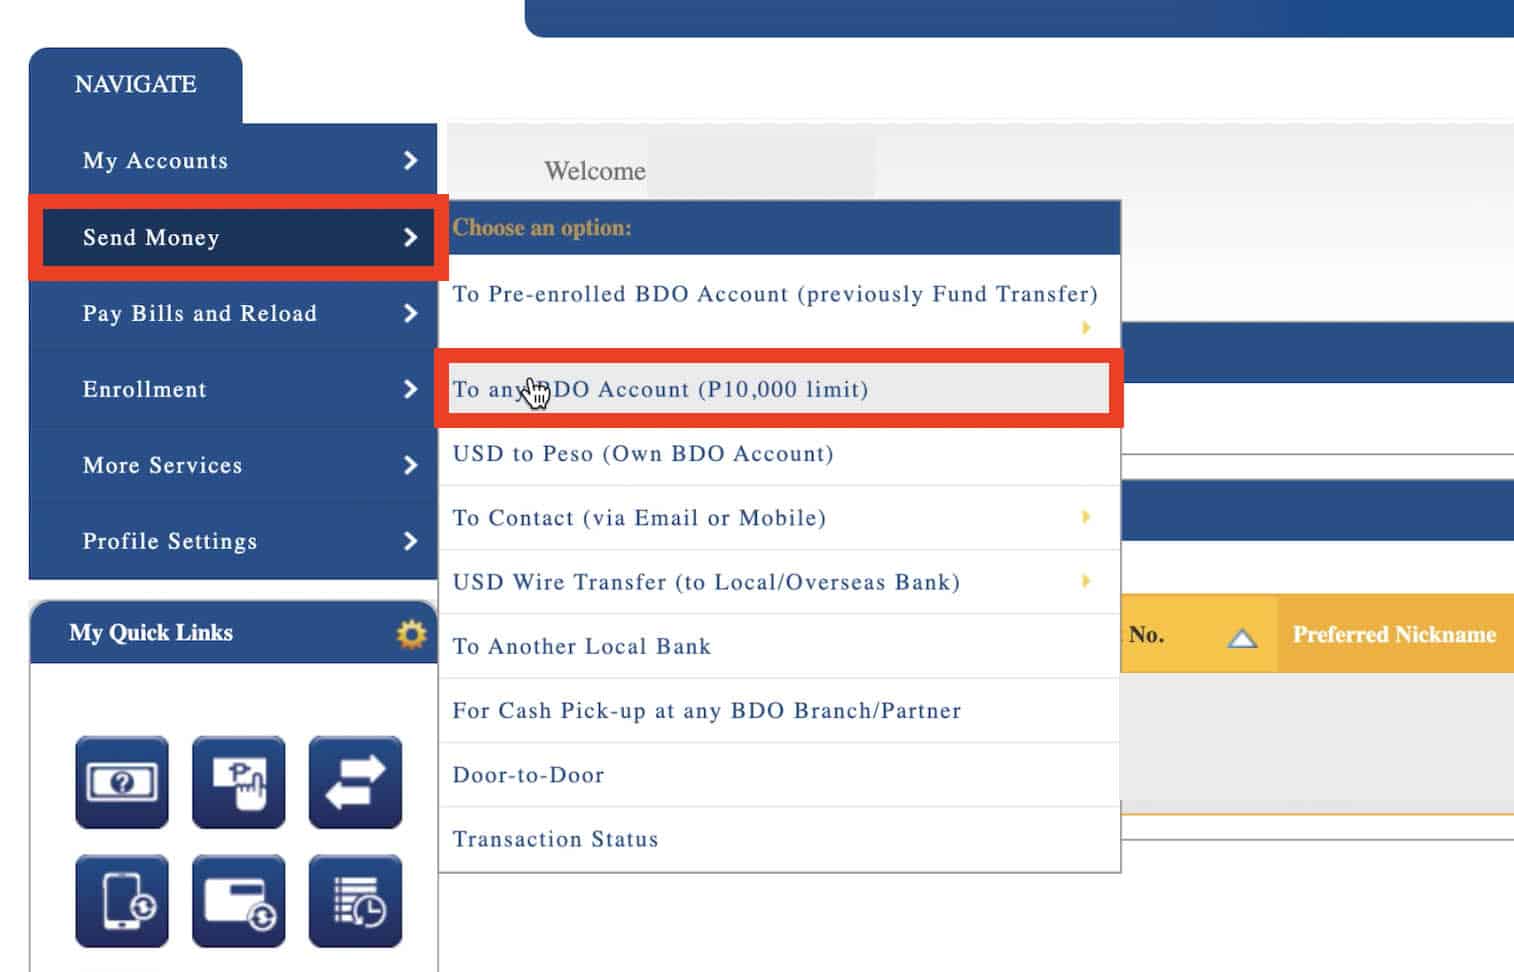 BDO to BDO: How to Transfer Money to Another BDO Account via Online Banking  | The Poor Traveler Itinerary Blog